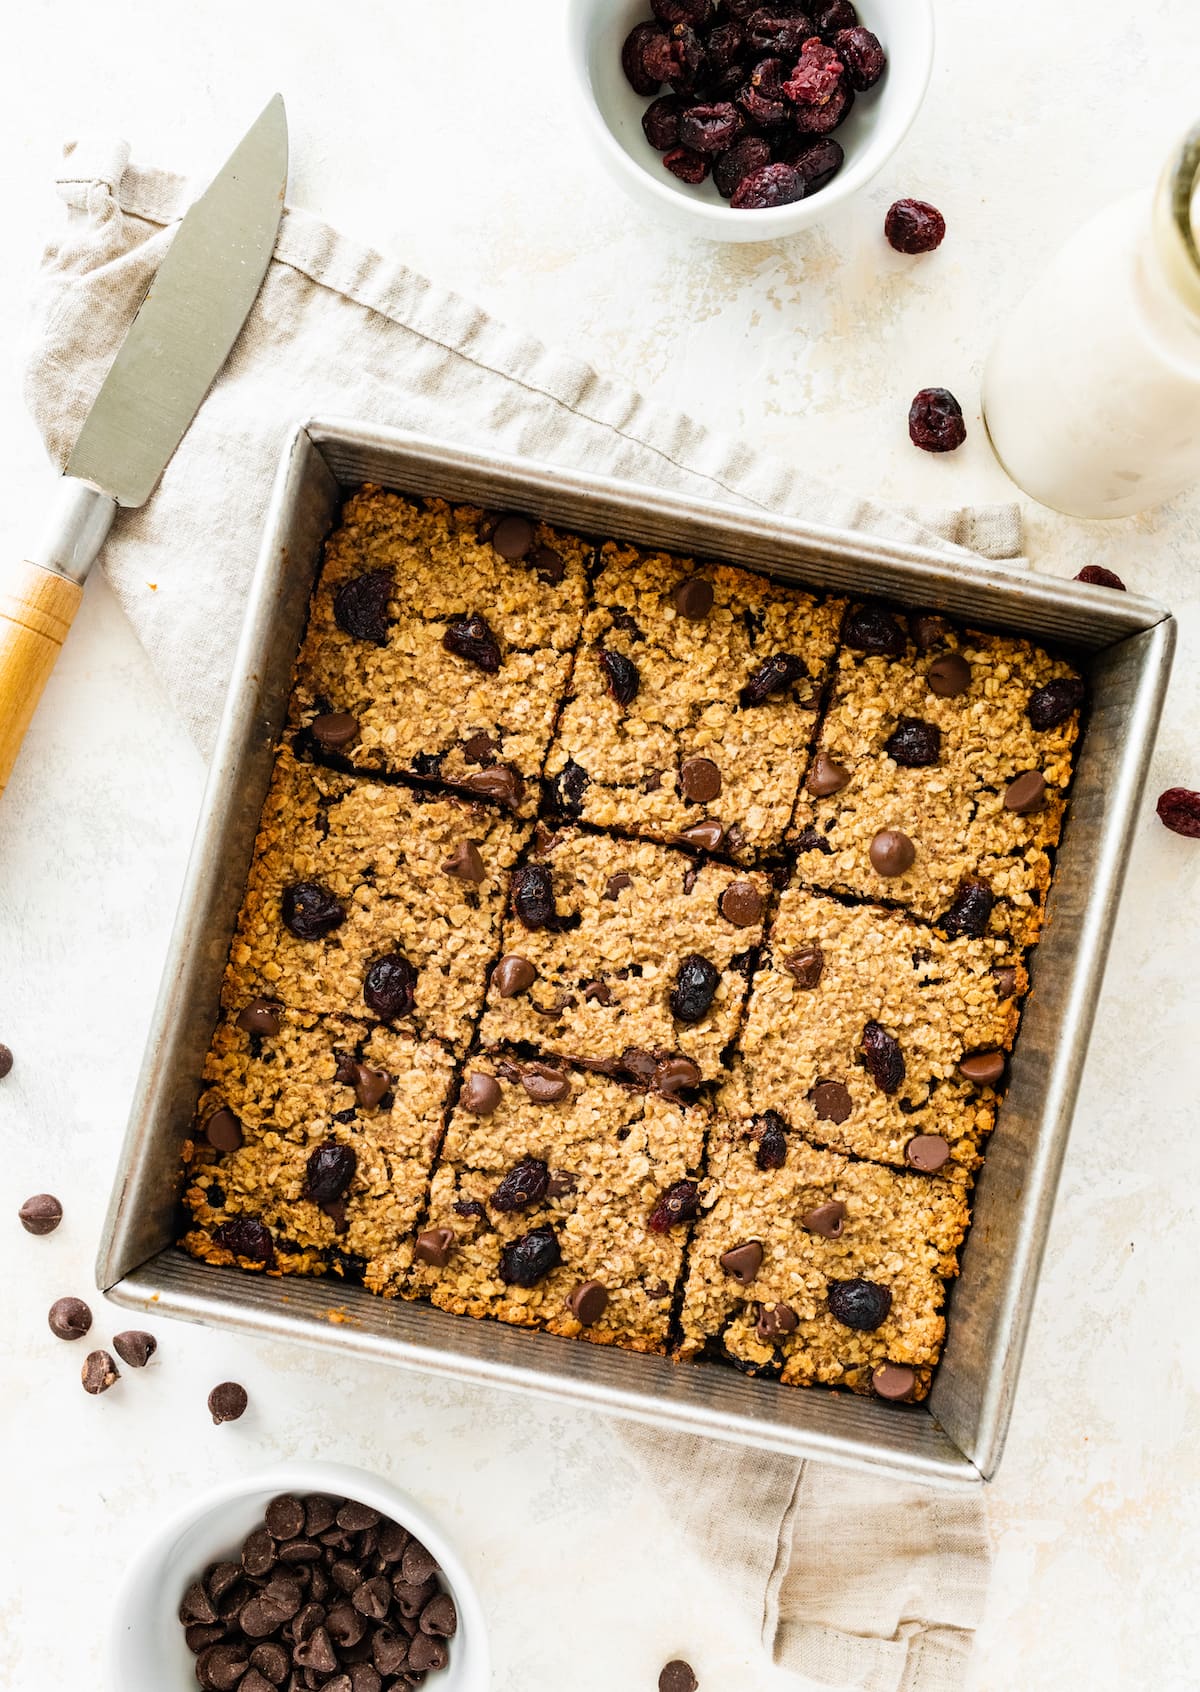 Oatmeal breakfast bars cut into squares, in a square baking pan.